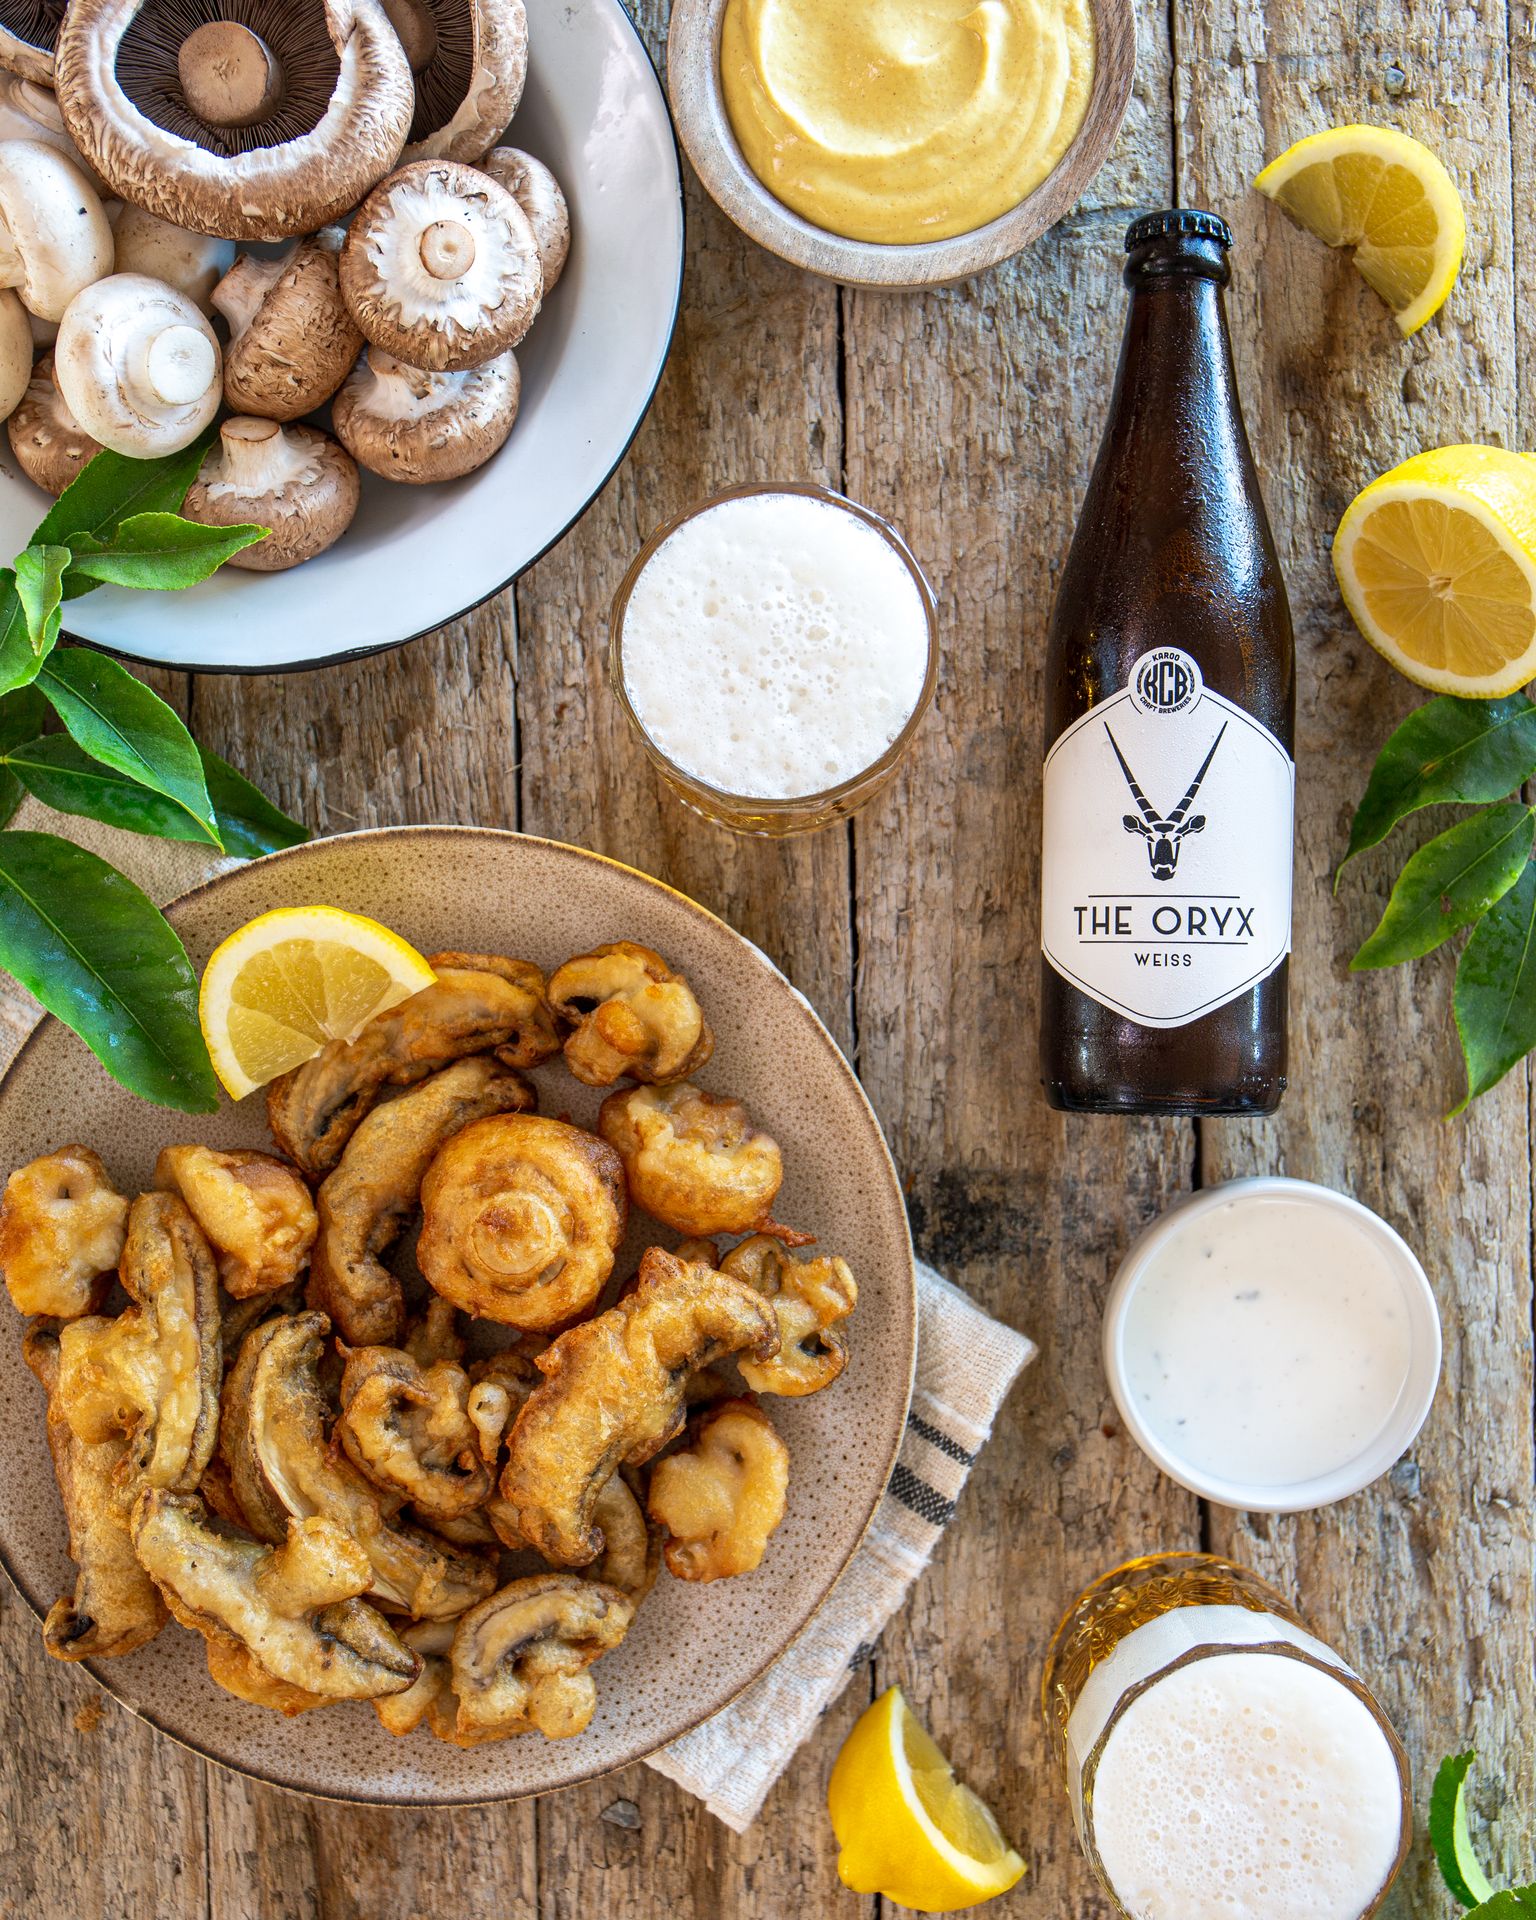 You are currently viewing SA Craft beer and mushroom pairings 